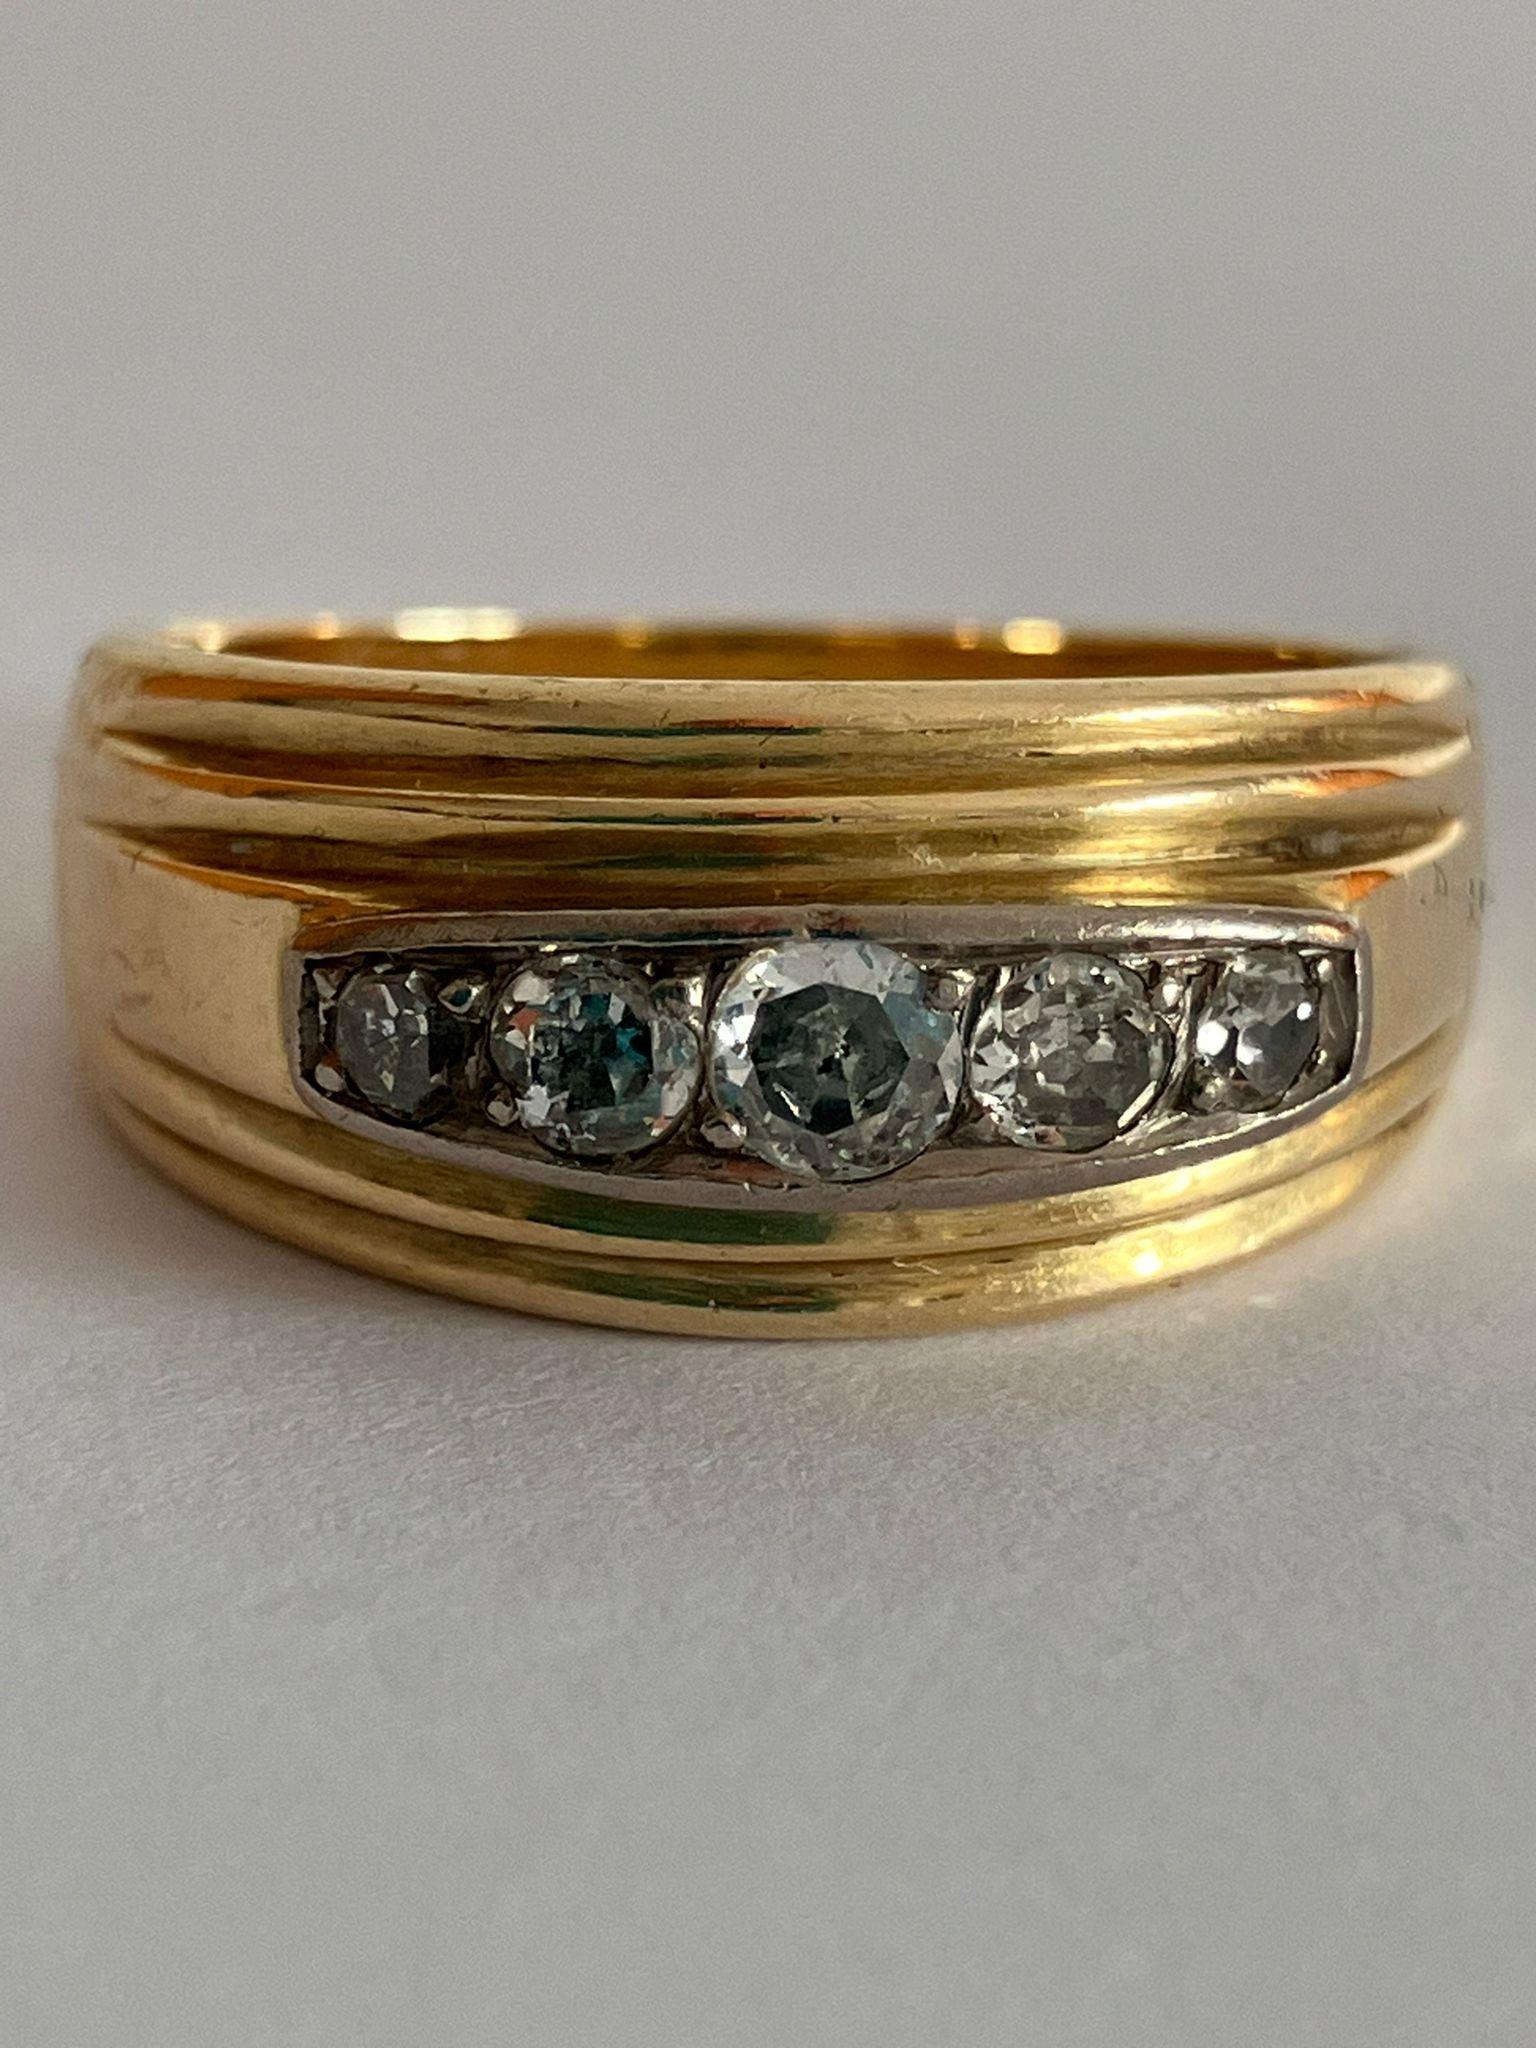 A QUALITY 14 carat YELLOW GOLD RING Set with 5 x sparkling DIAMONDS to top. 6.9 grams. Size P 1/